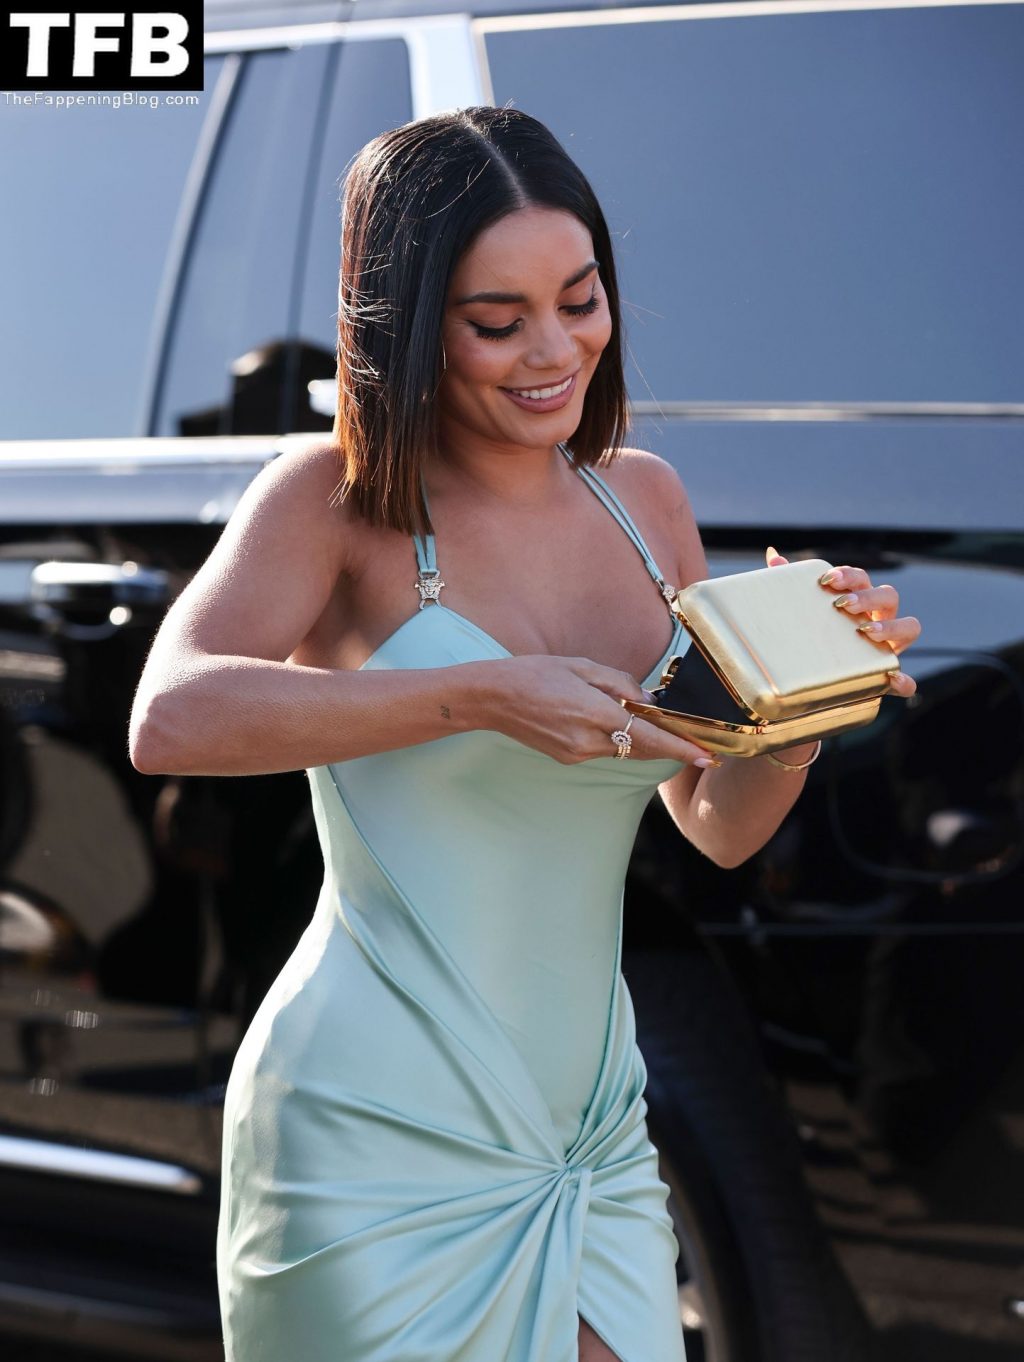 Vanessa Hudgens Sexy The Fappening Blog 10 1 1024x1362 - Vanessa Hudgens Shows Off Her Sexy Figure at the 28th Screen Actors Guild Awards (73 Photos)